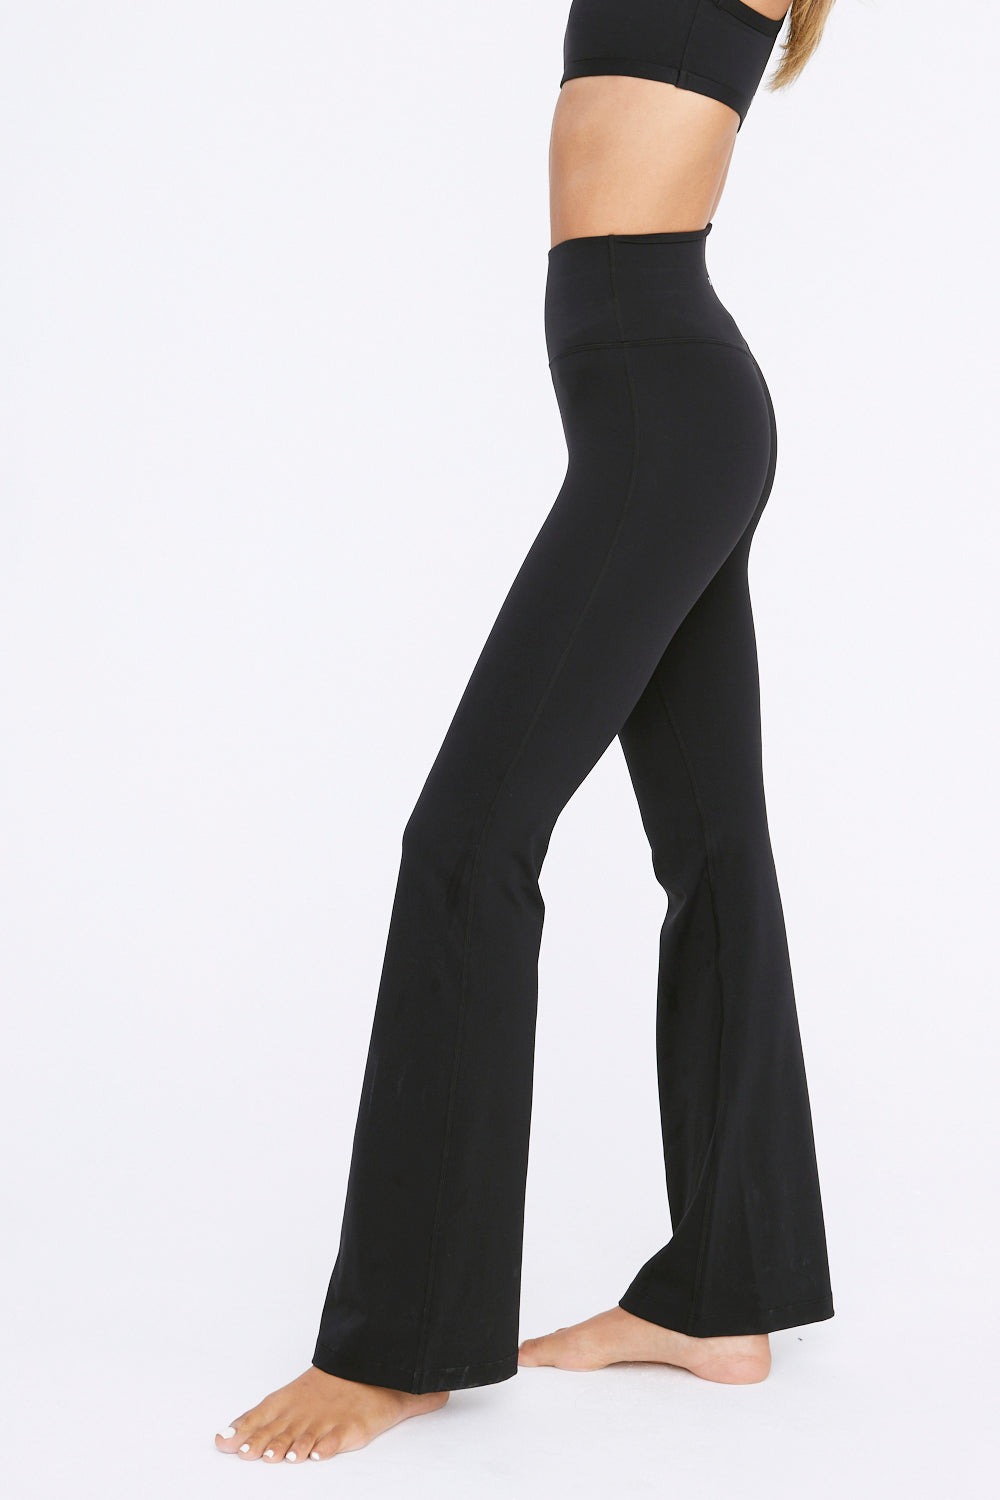 and on sale right now! buttery soft no front seam flared leggings